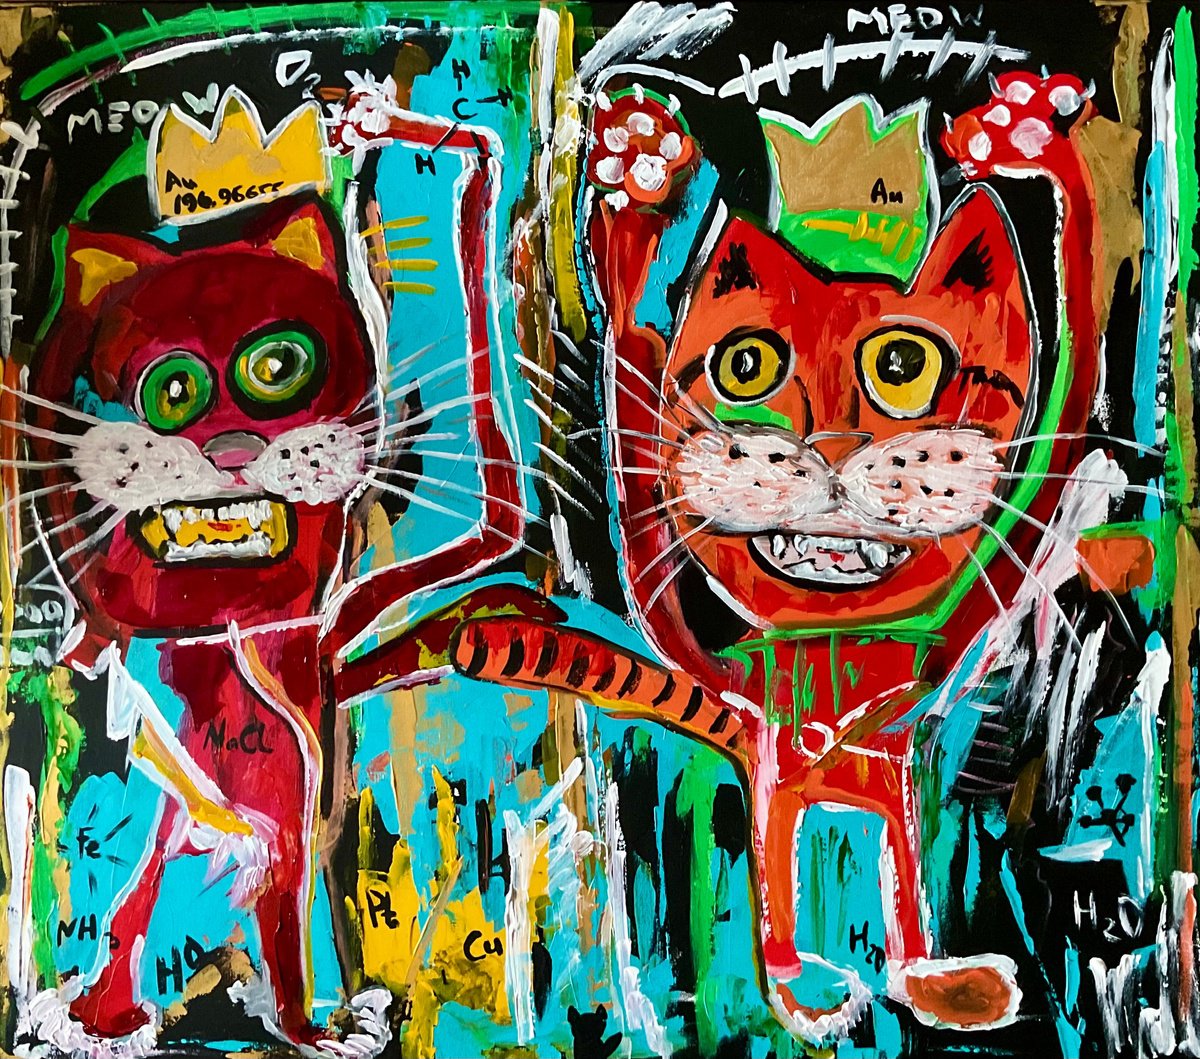 Cats kings alchemists friends in style of famous painting by Jean-Michel Basquiat. by Olga Koval